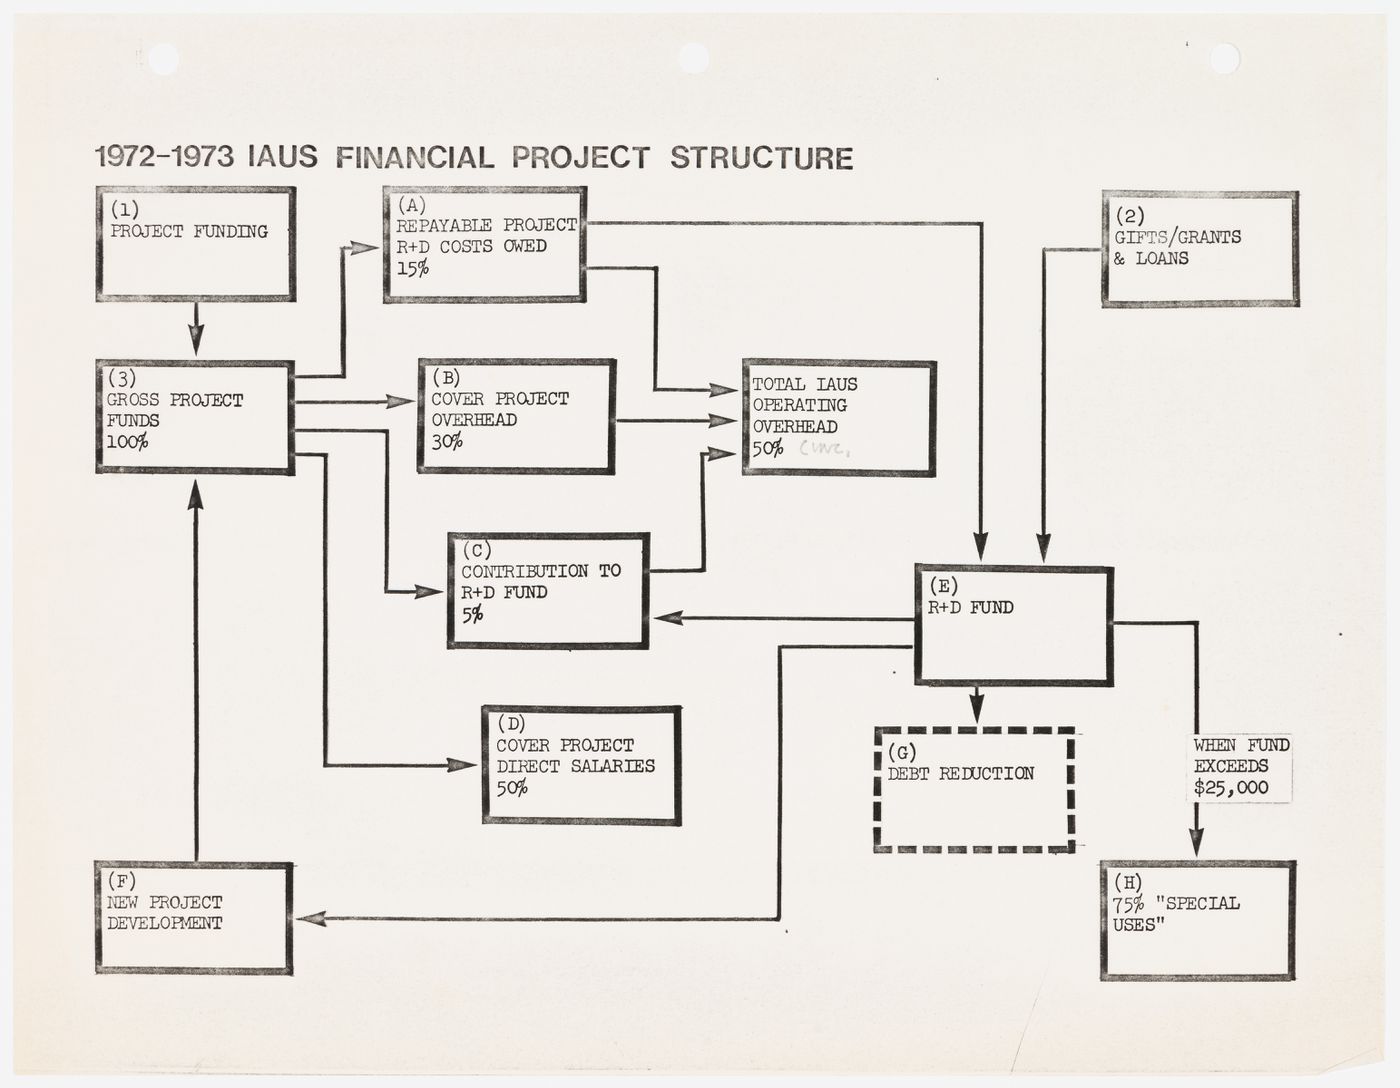 Diagram of financial project structure for Binghamton Street Study